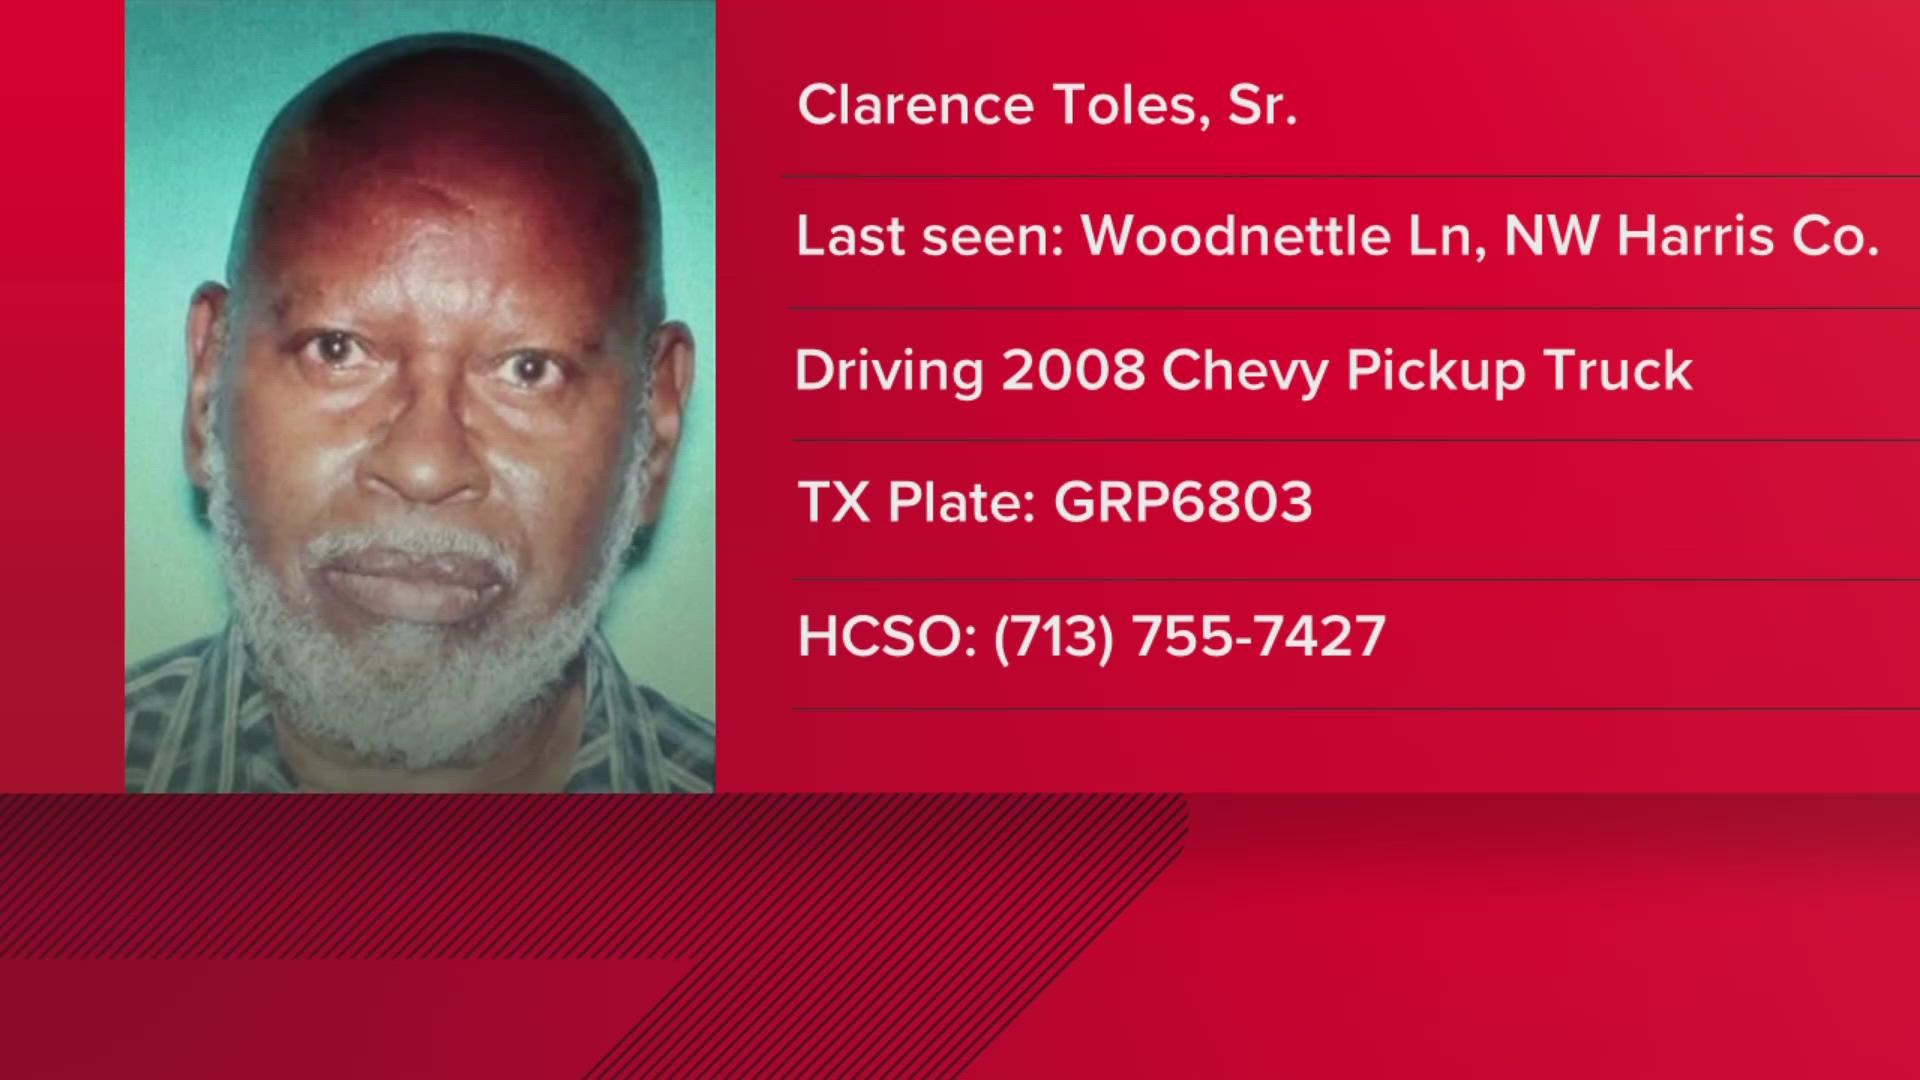 Authorities need your help to find a missing 70-year-old man with Alzheimer's disease last seen in northwest Houston on Friday.